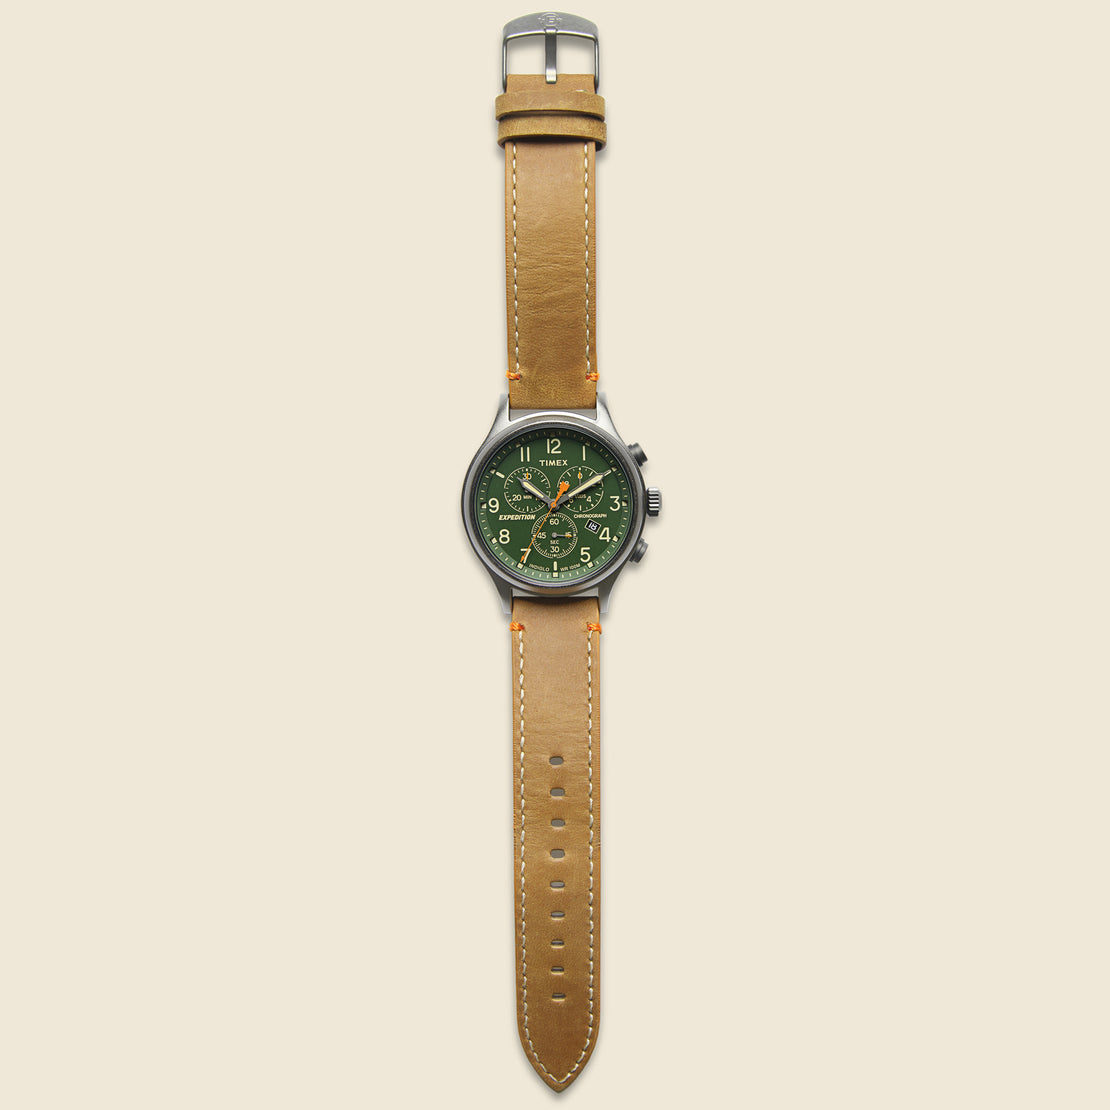 Expedition Scout Chronograph Leather Strap Watch 42mm - Green/Tan